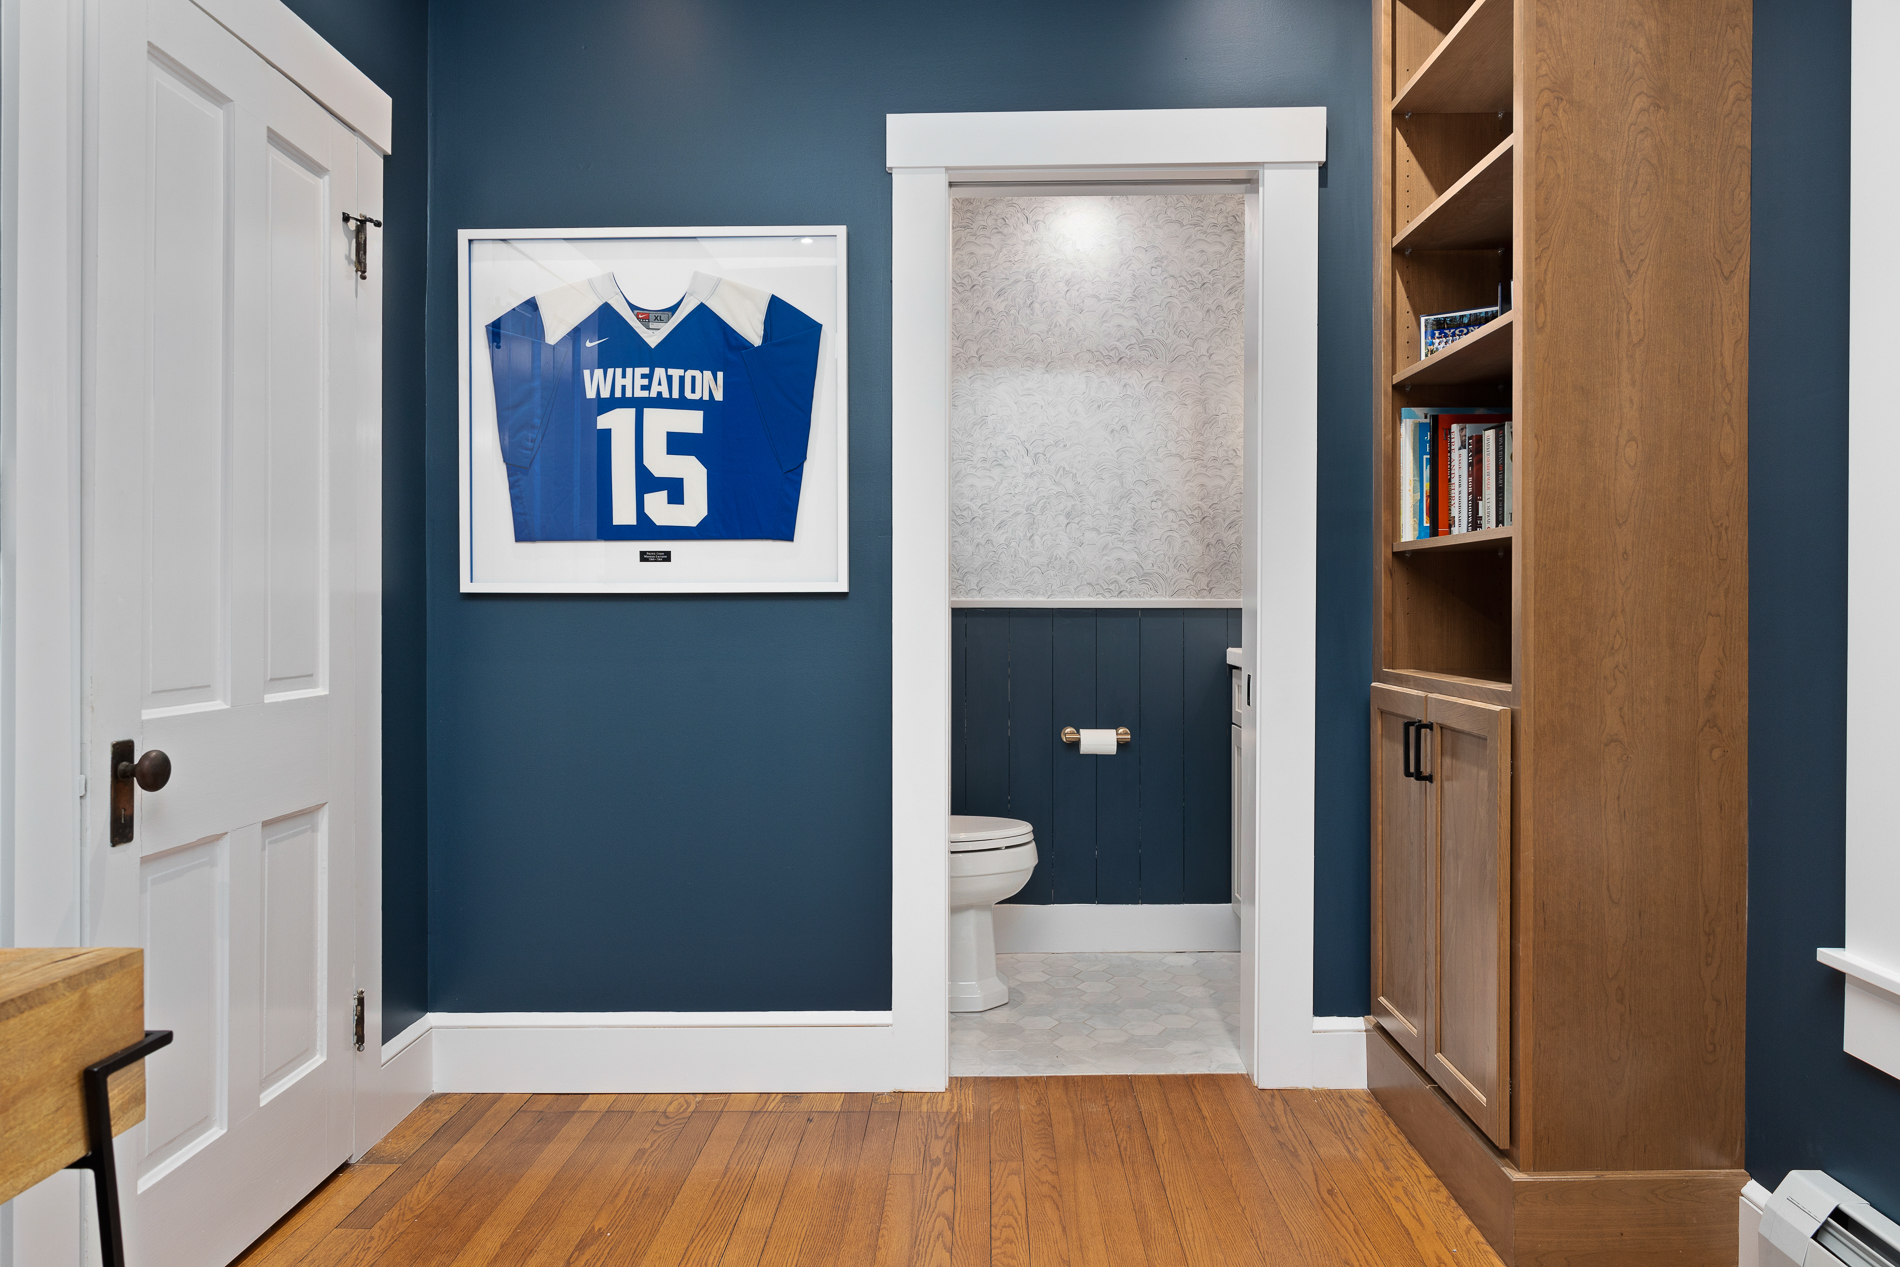 Bathroom Entry Way with Wooden Bookshelf and Wooden Floors